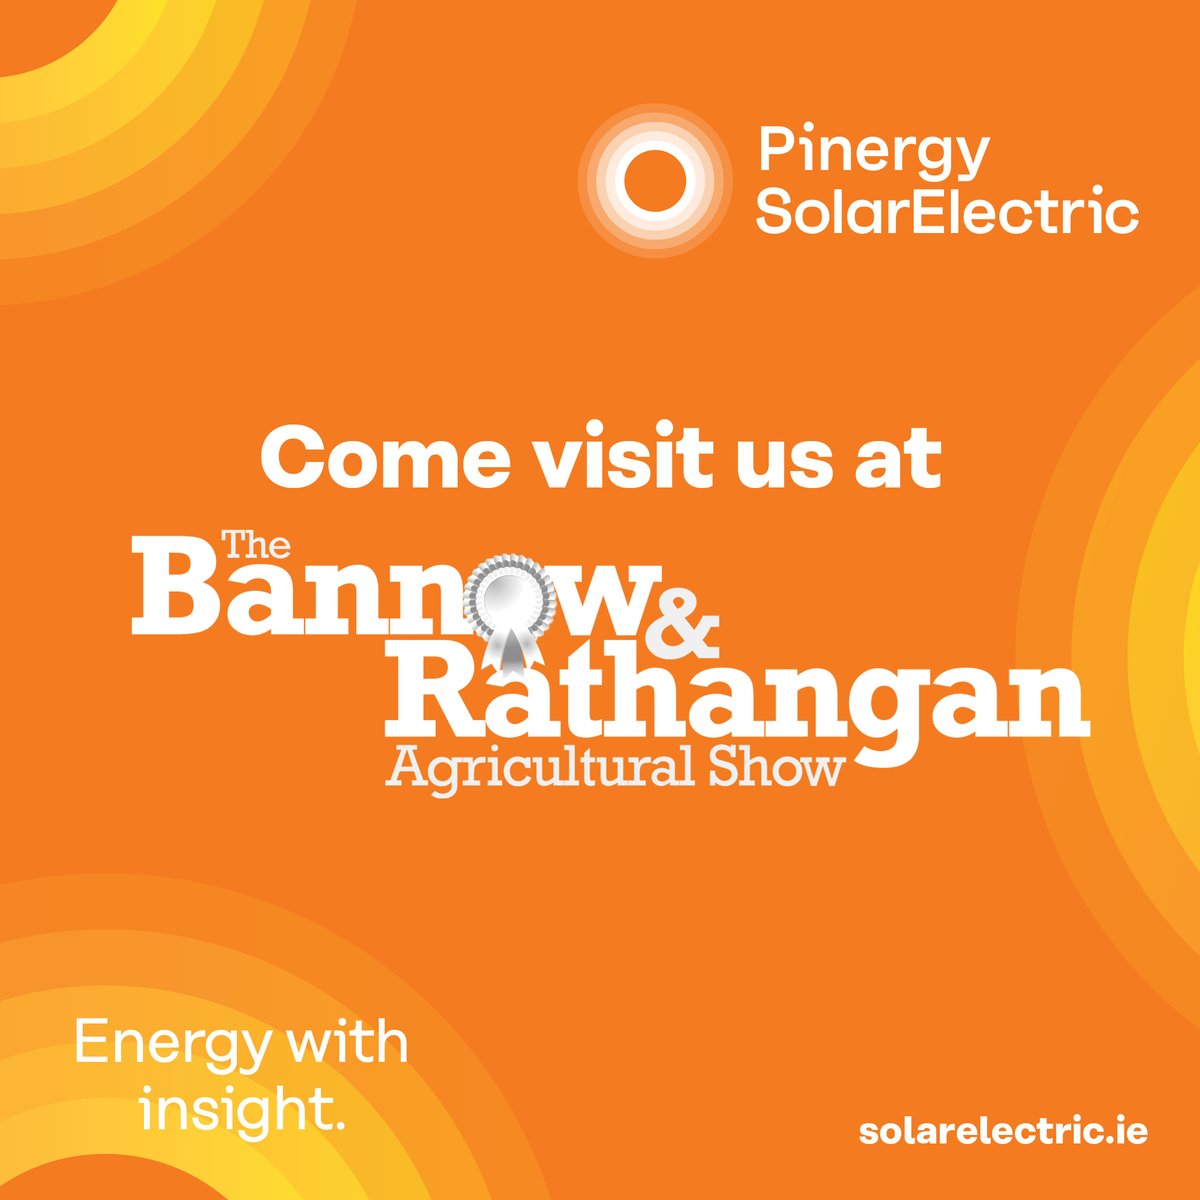 Our team will be at the Bannow & Rathangan Agricultural Show tomorrow. Pop by and have a chat about our sustainable energy solutions for your home or farming needs.

📩 solar@pinergy.ie 🌐 solarelectric.ie

#AgriculturalShow
#EnergyWithInsight
#Sustainability